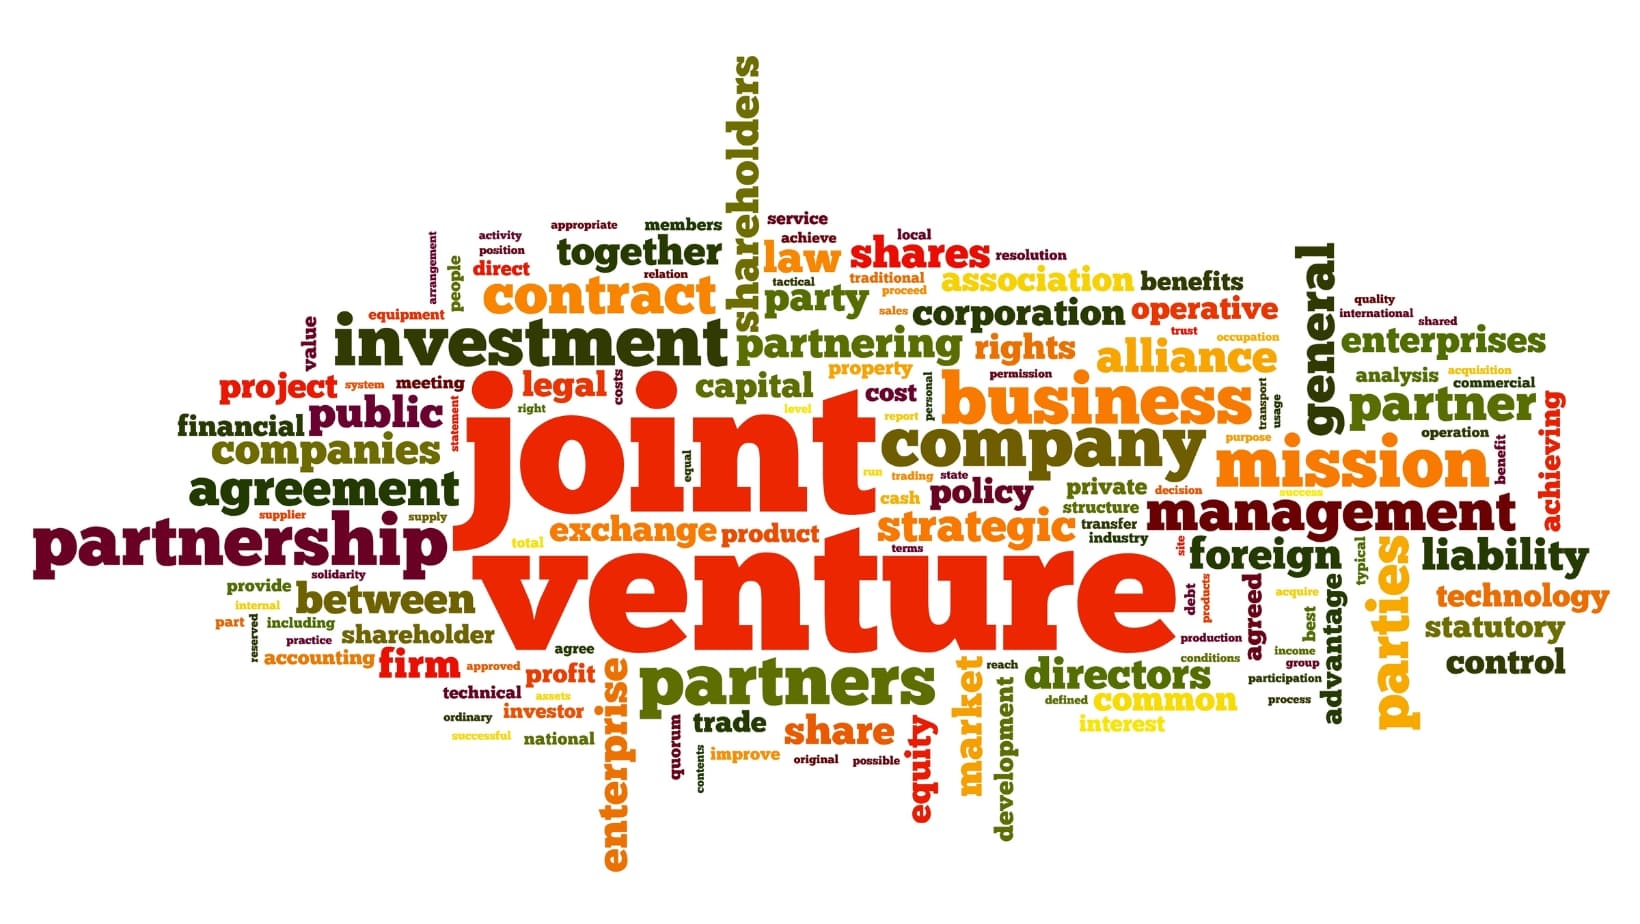 joint venture and partnership